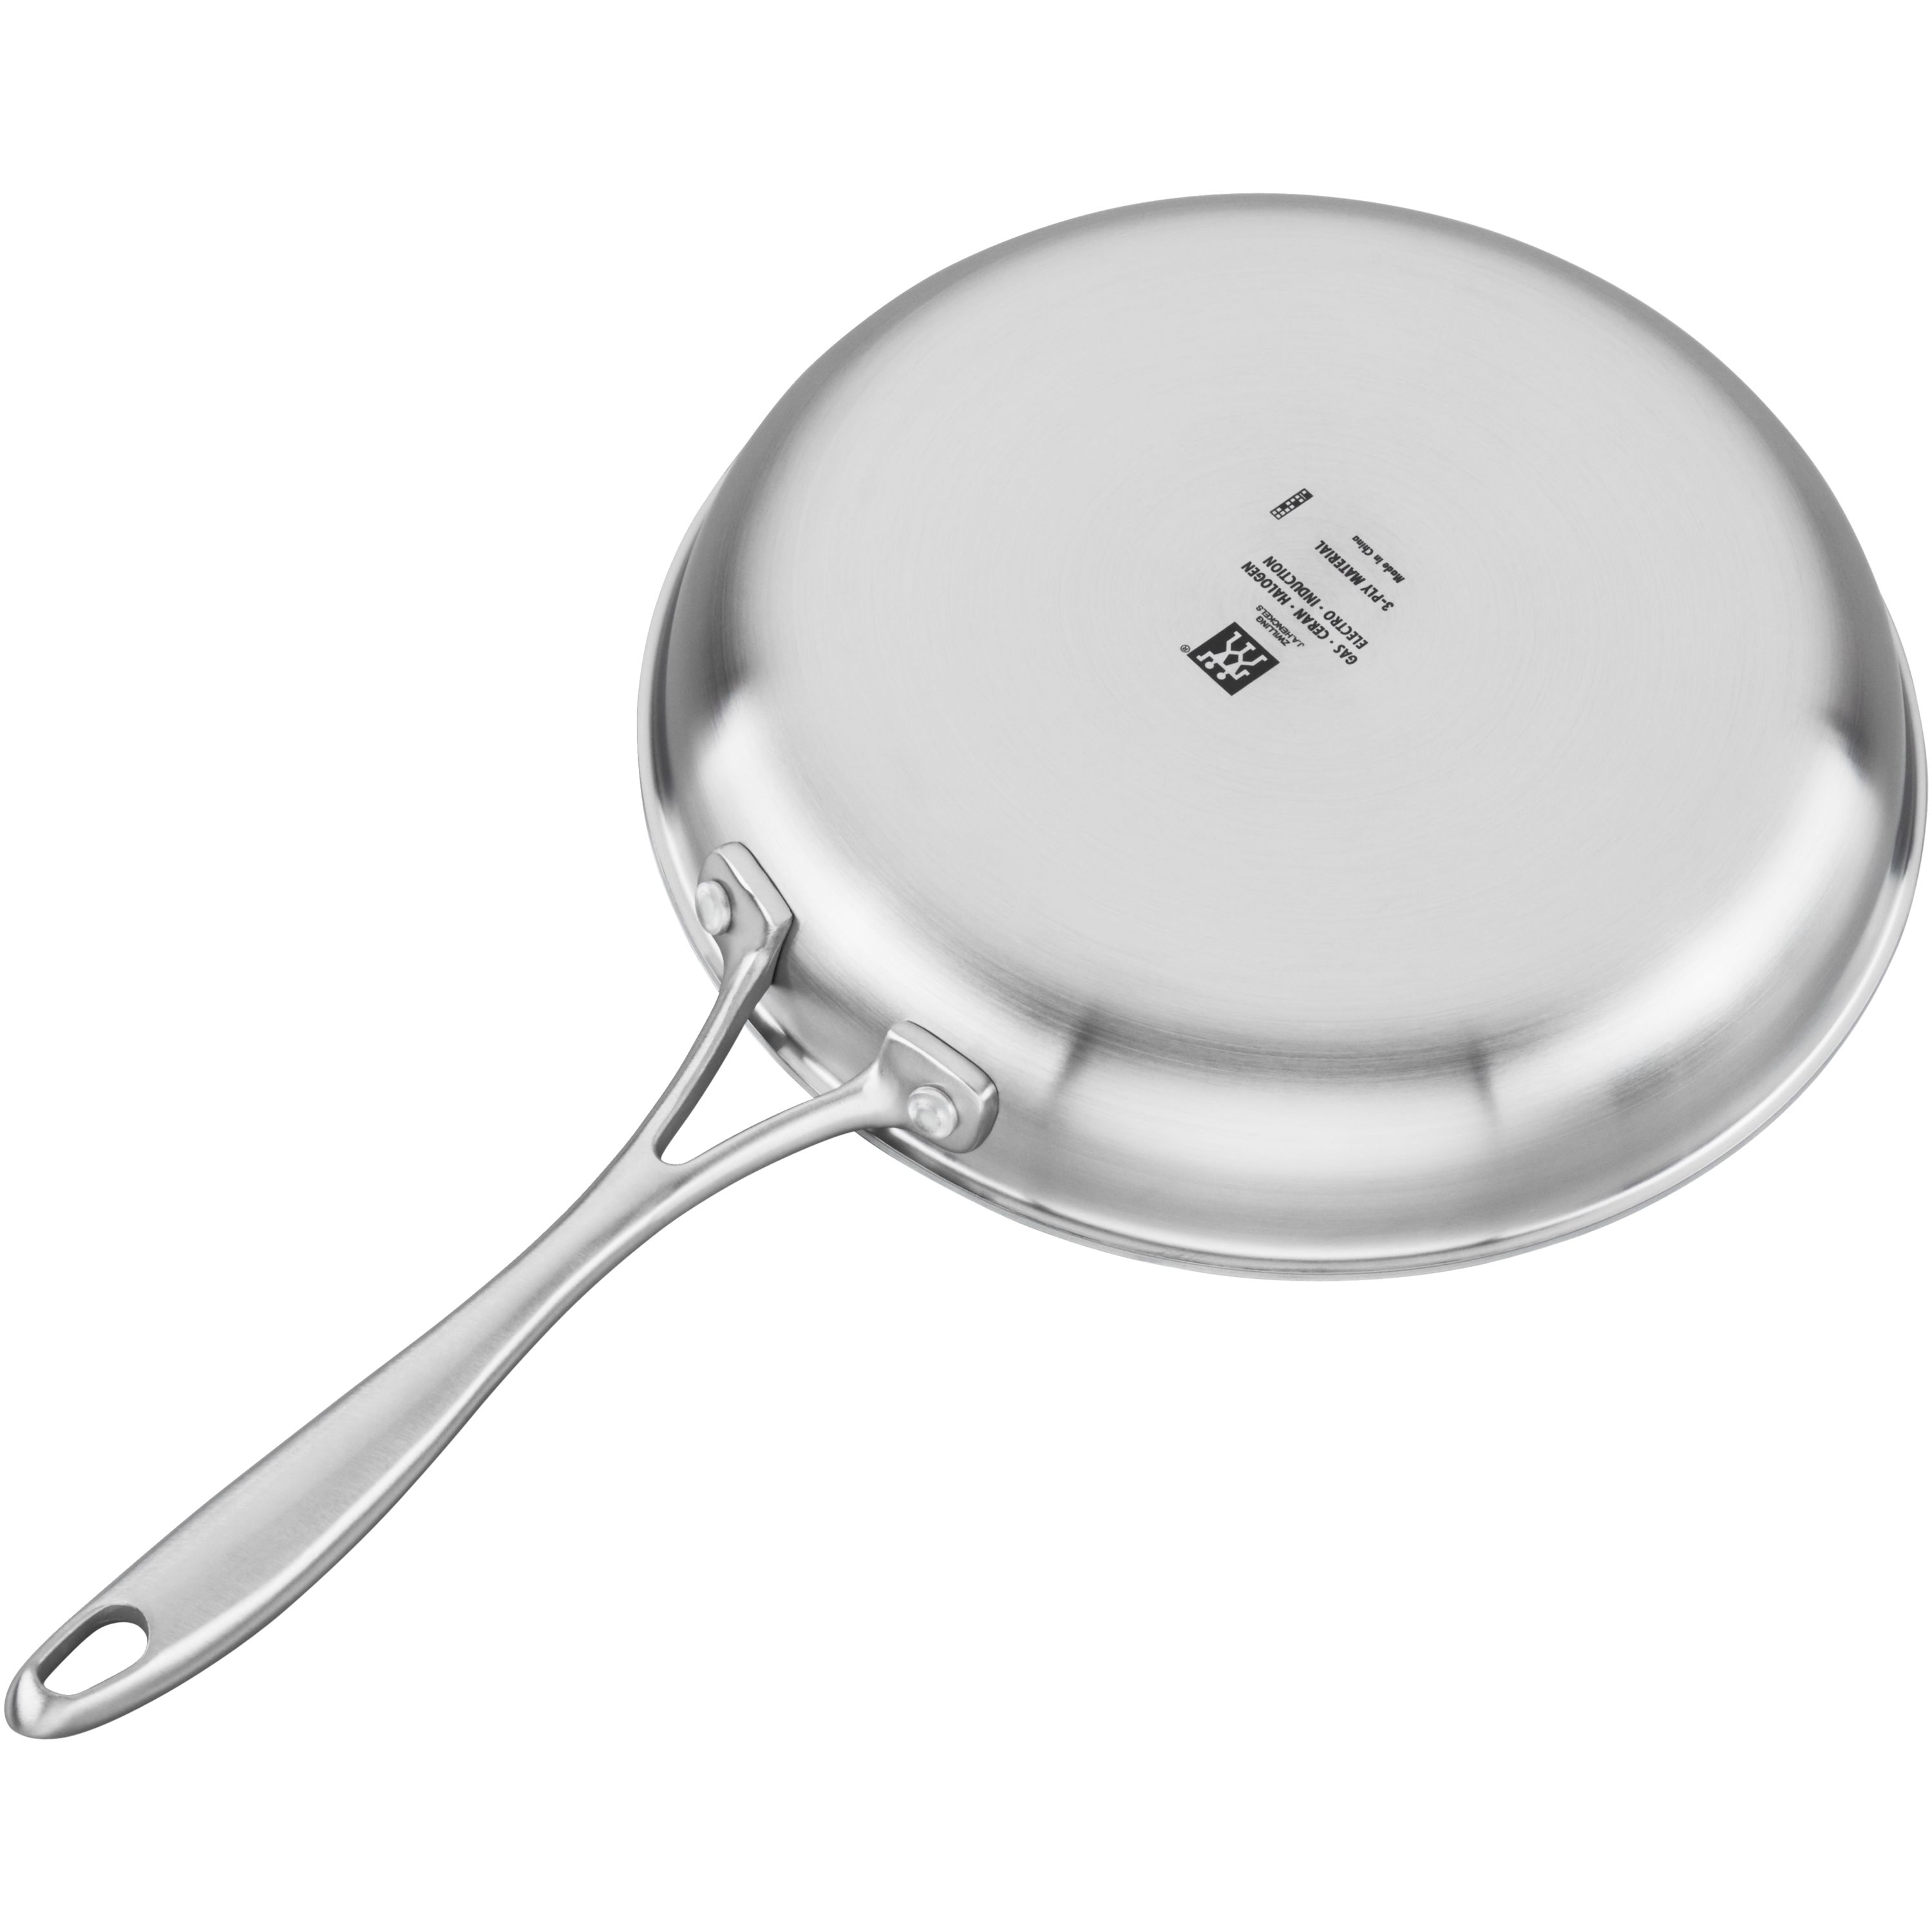 Zwilling Spirit 3-ply 1-qt Stainless Steel Saucepan : Target